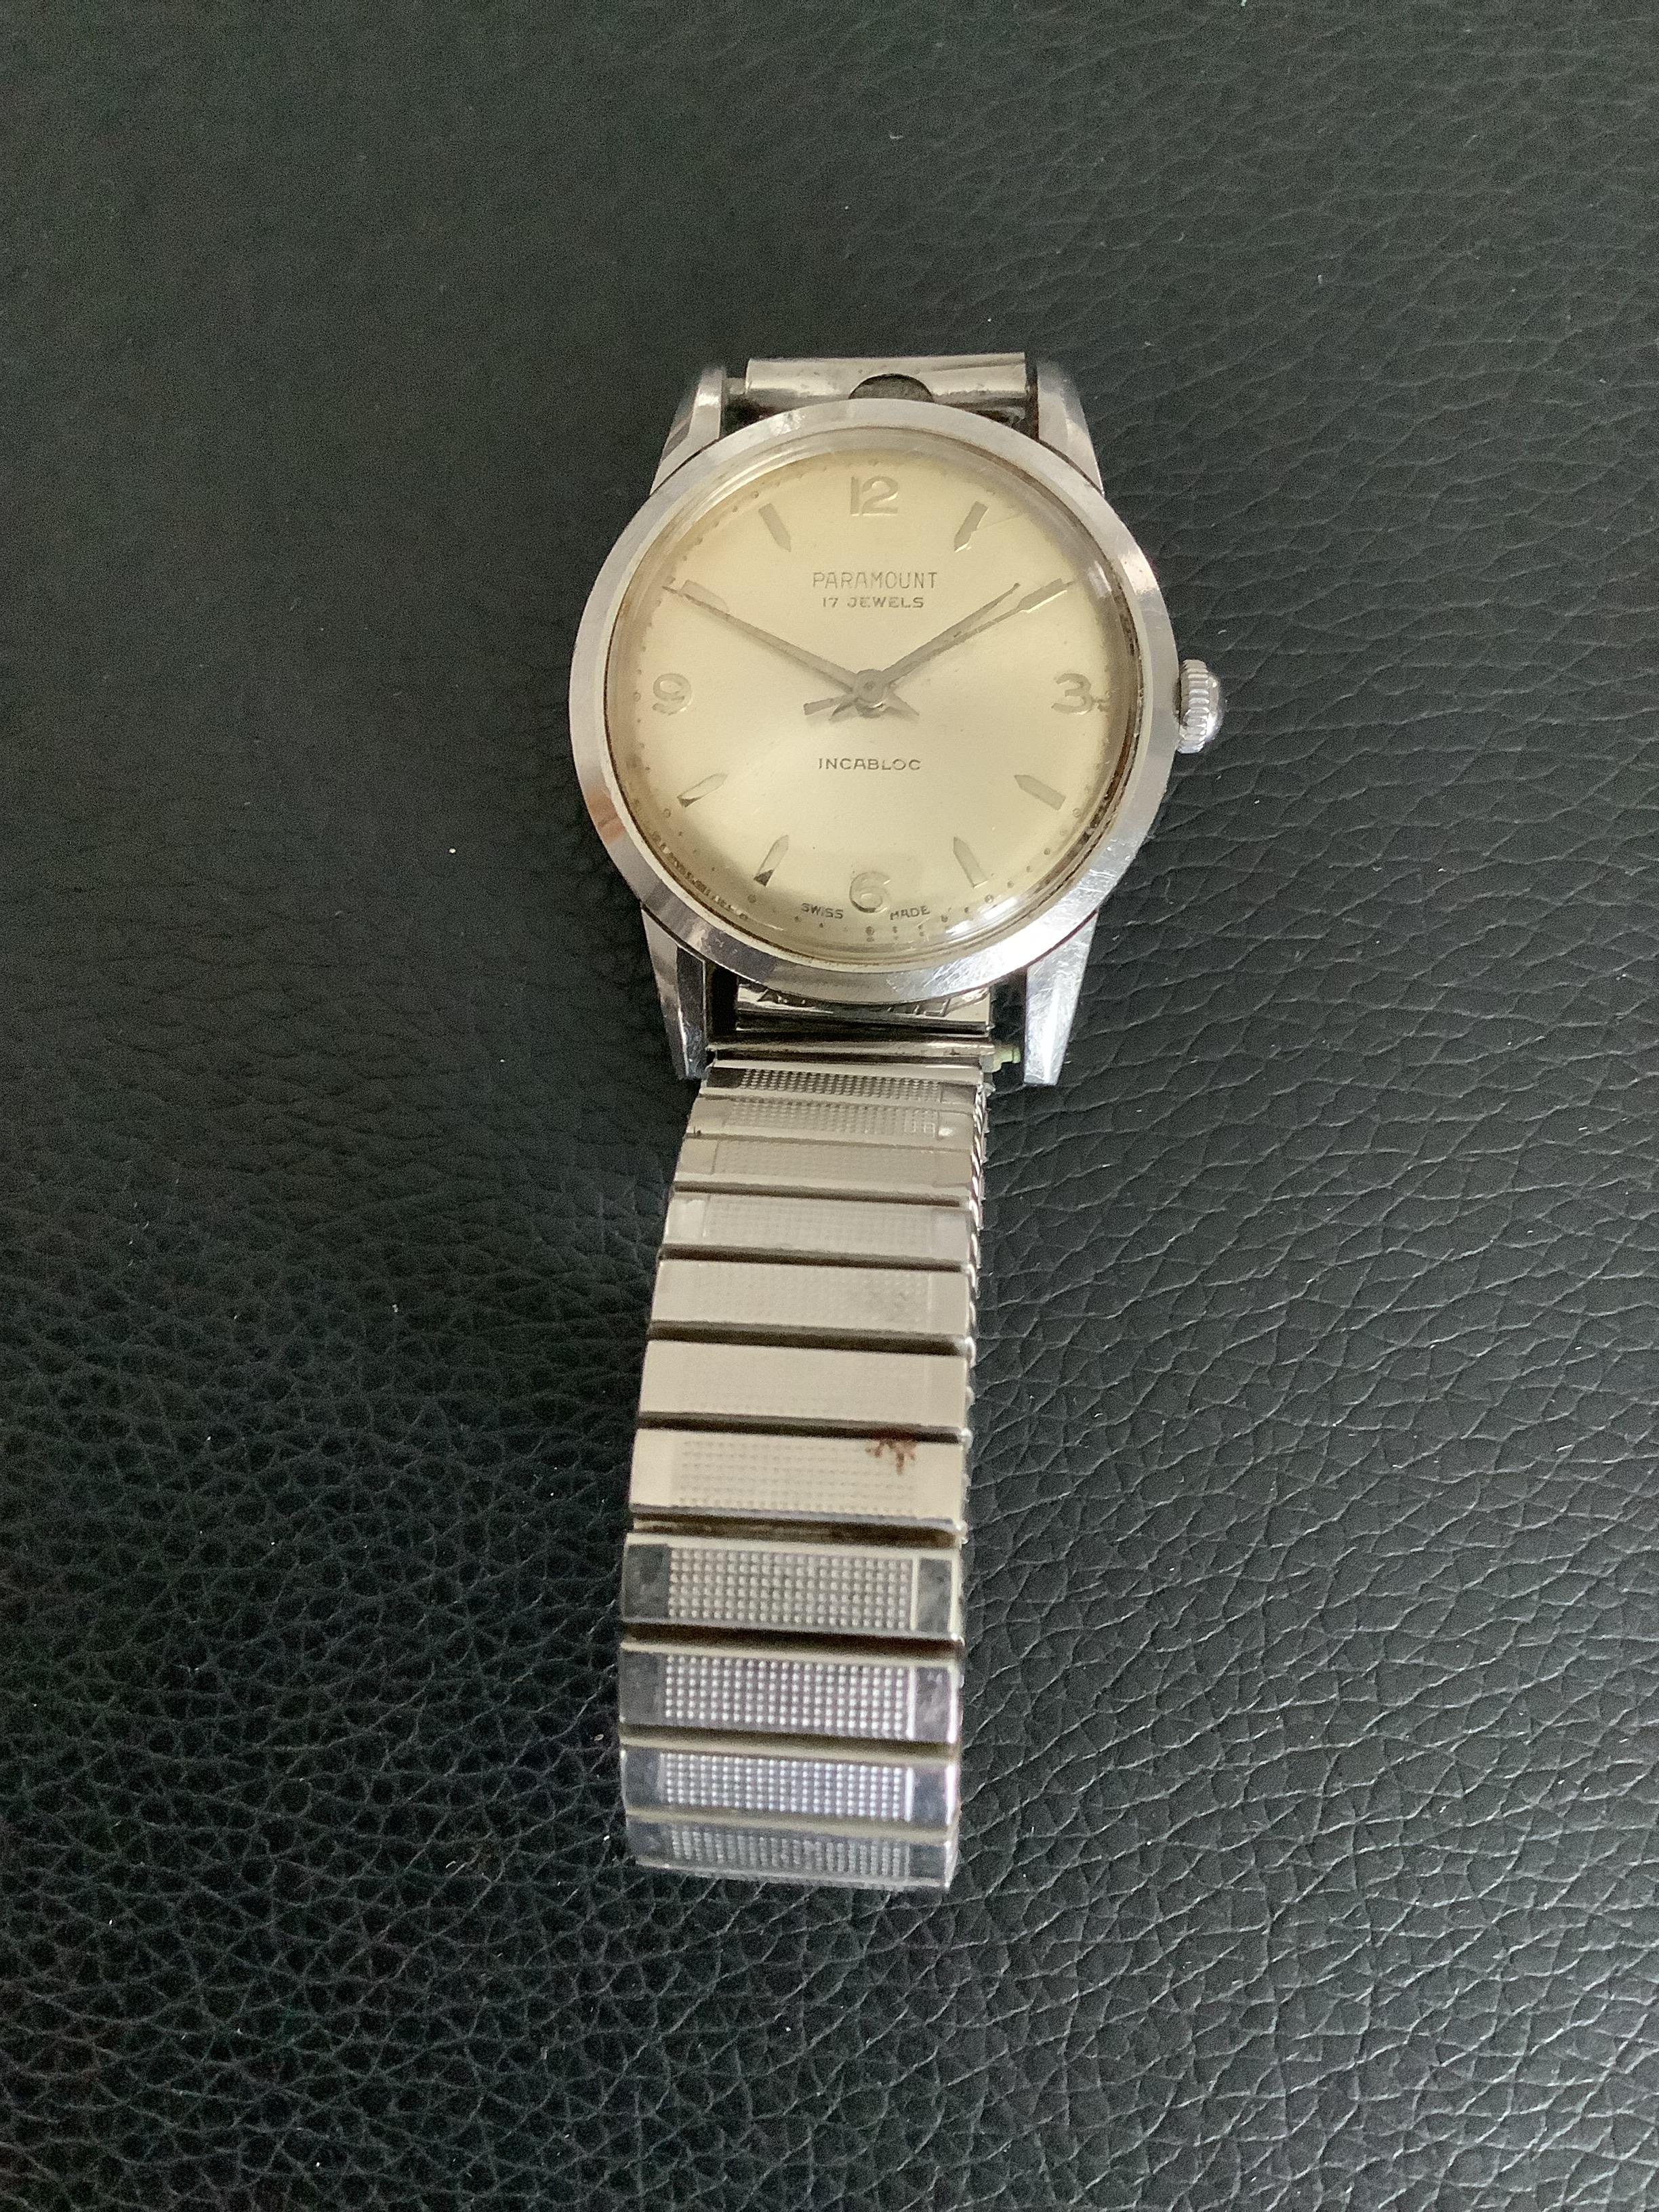 Vintage Paramount 17 Jewel Manual Wind Gents Wristwatch with Fixoflex Bracelet (GS 178) This may - Image 2 of 4